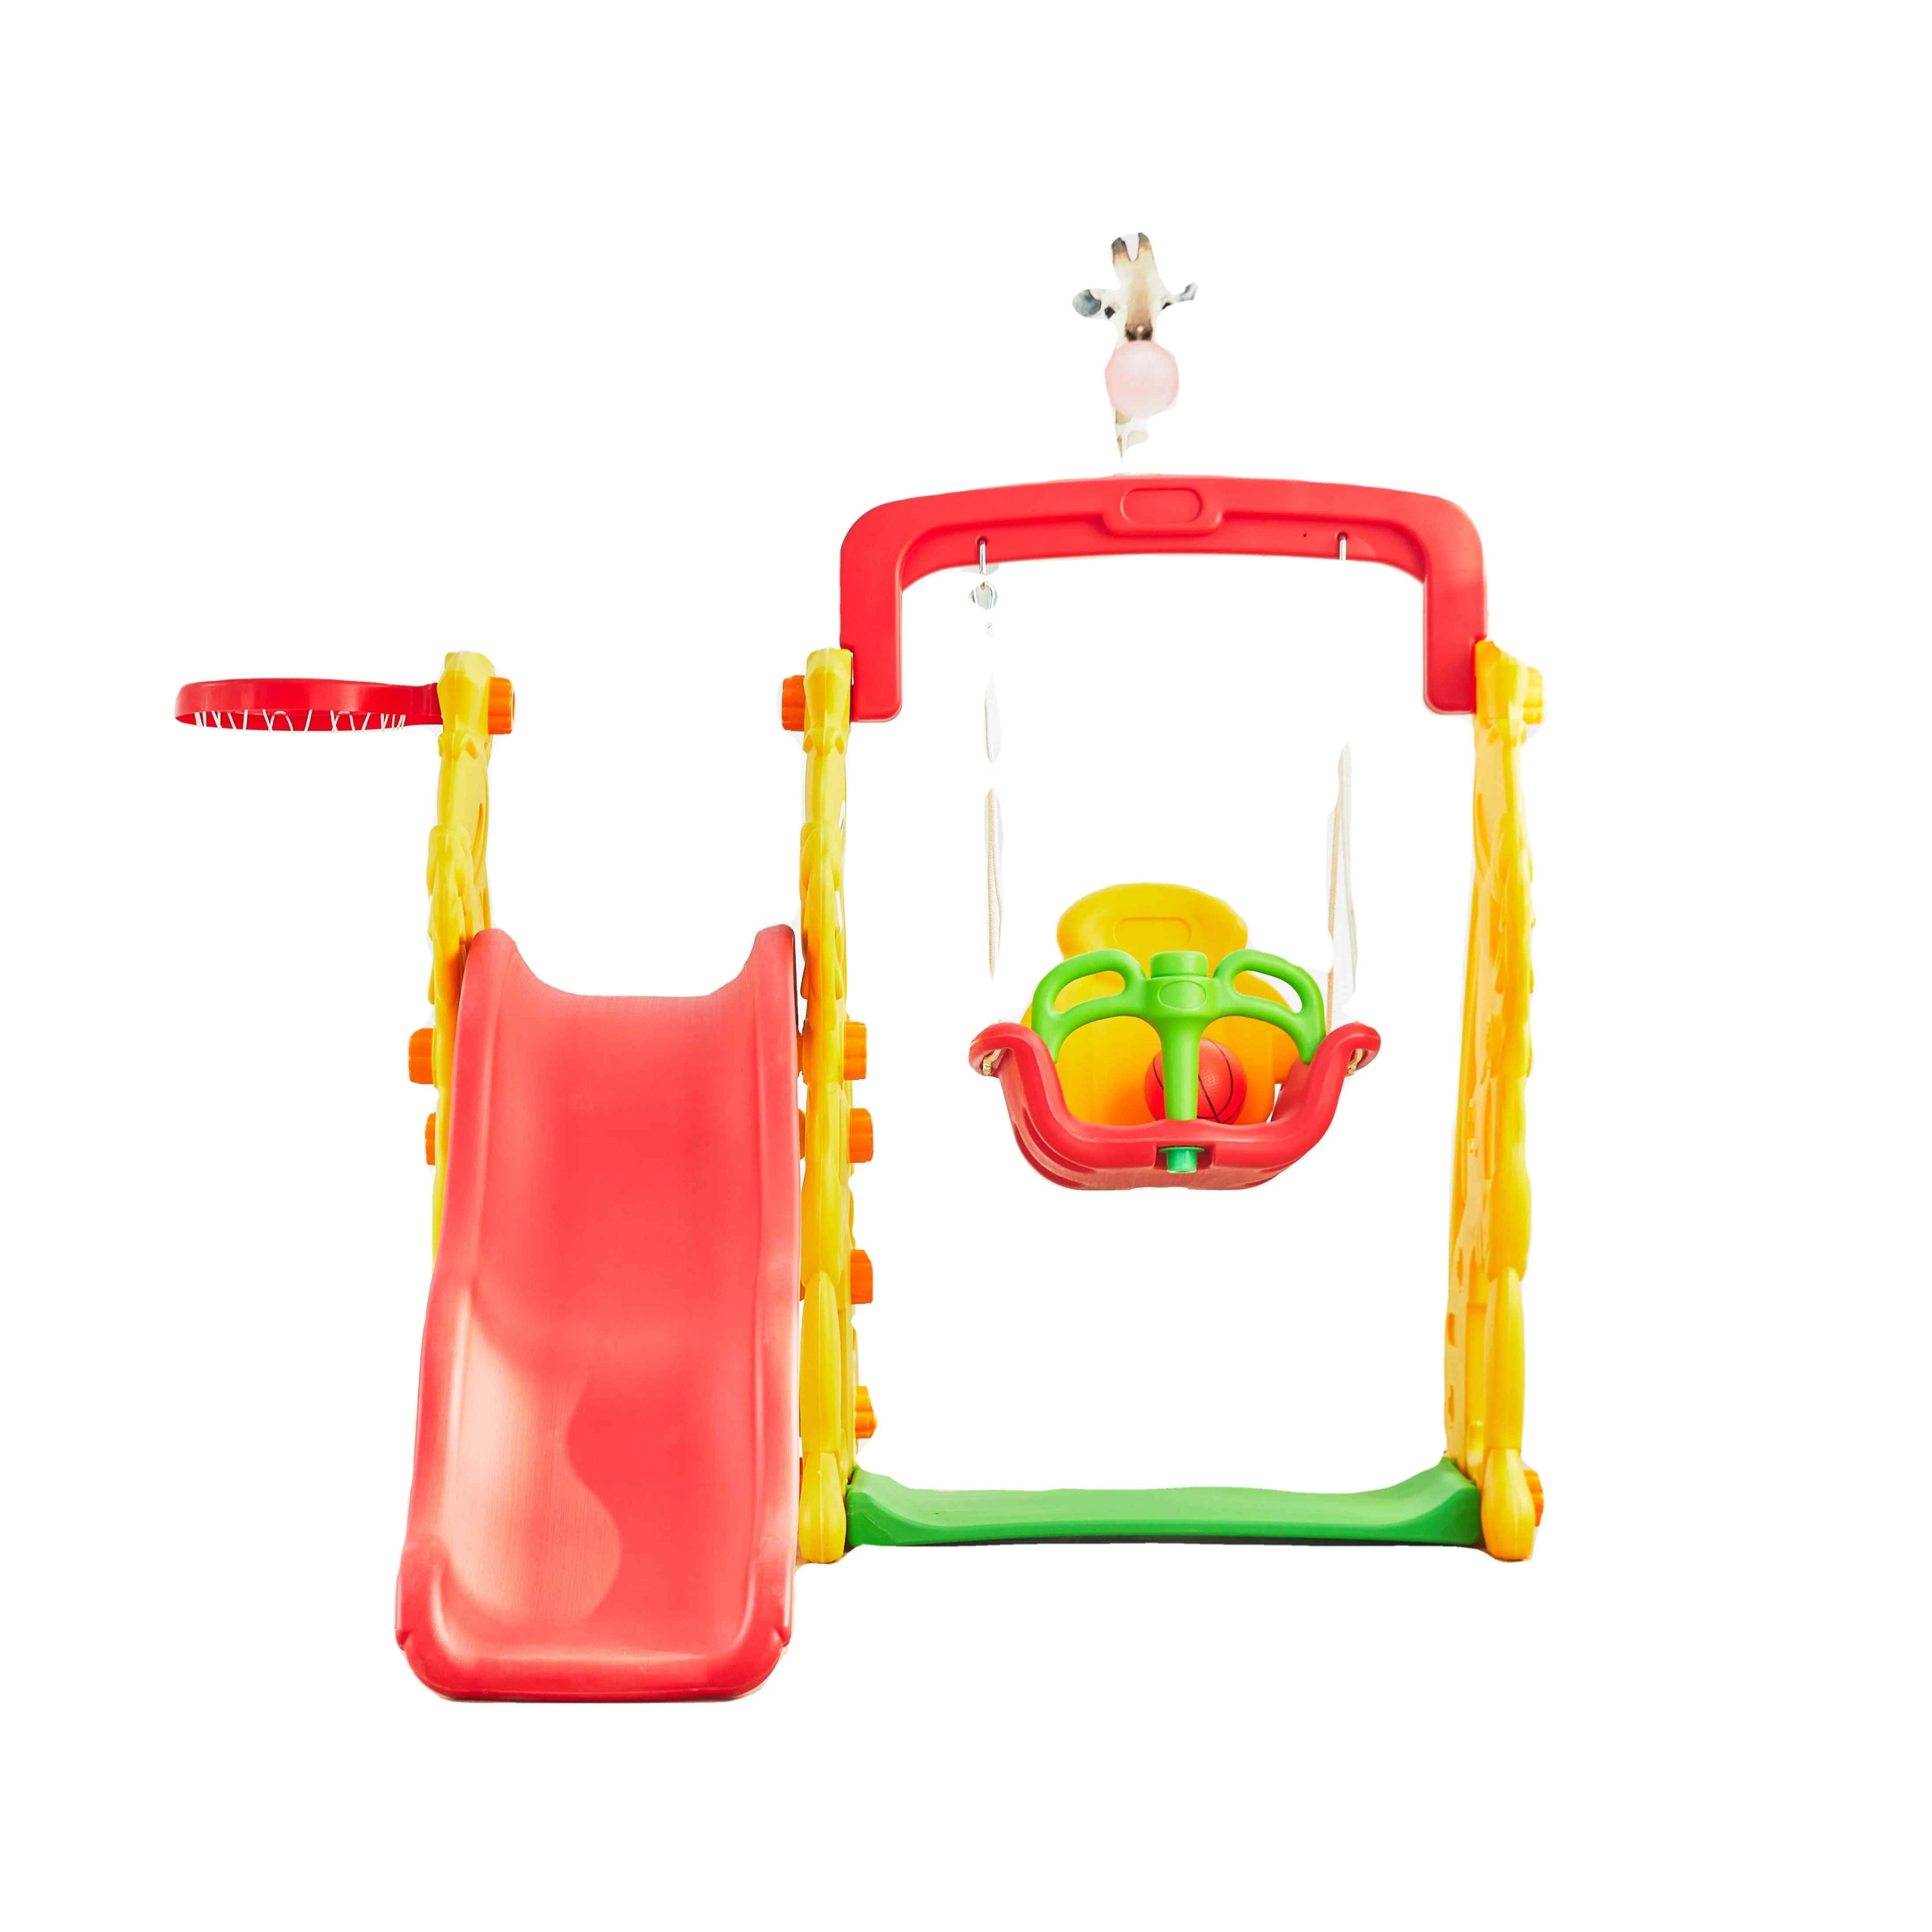 Factory Supply Easy To Install Bunny Design Happy Toy Center Play Swing Set For Children